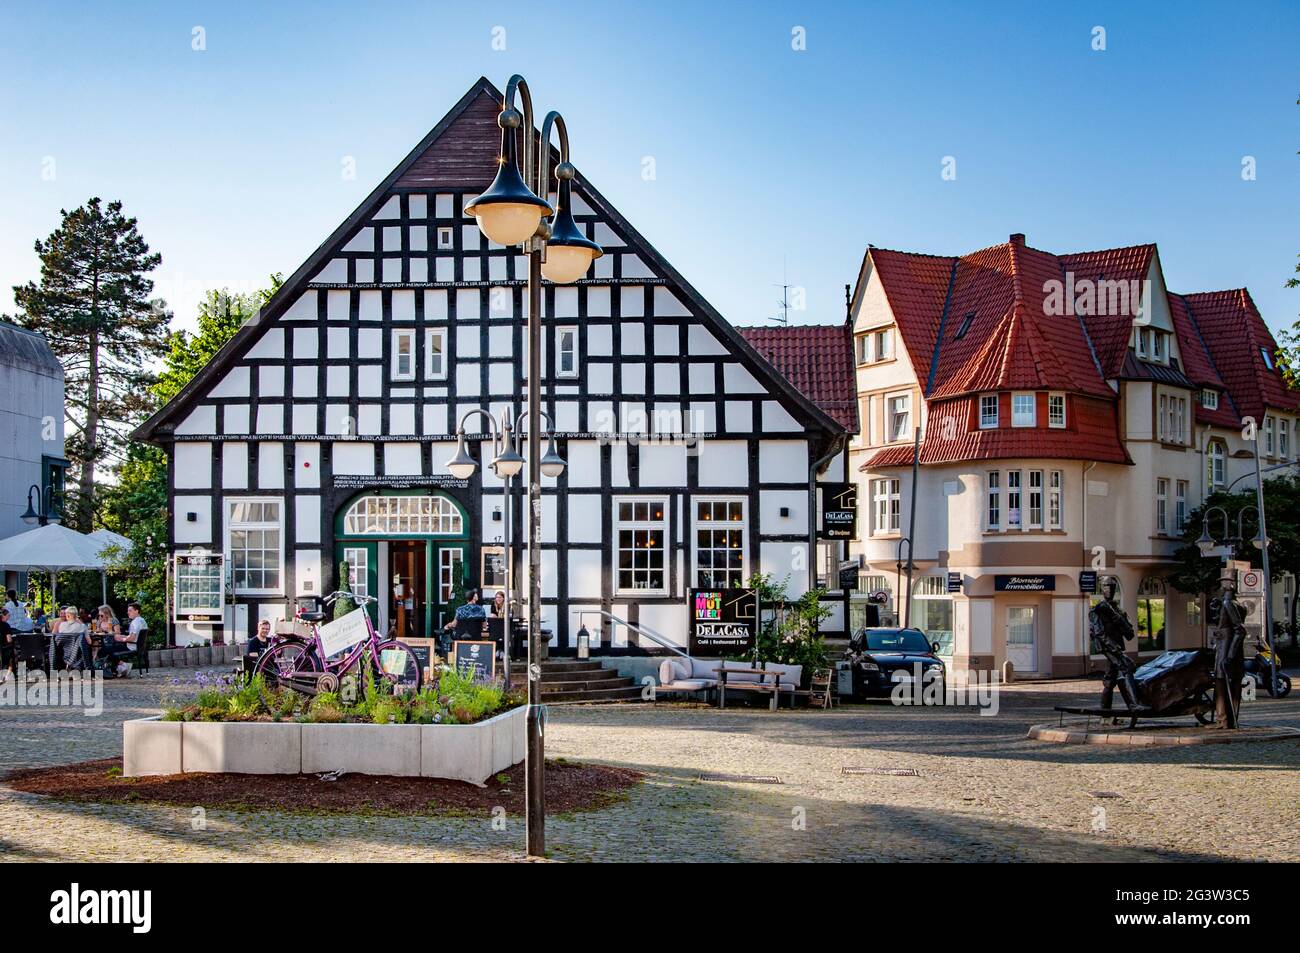 BUNDE, GERMANY. JUNE 12, 2021. DeLaCasa restaurant on the square, pink bicycle before the entrance with advertizing of apiary Land Frauen. Beautiful v Stock Photo